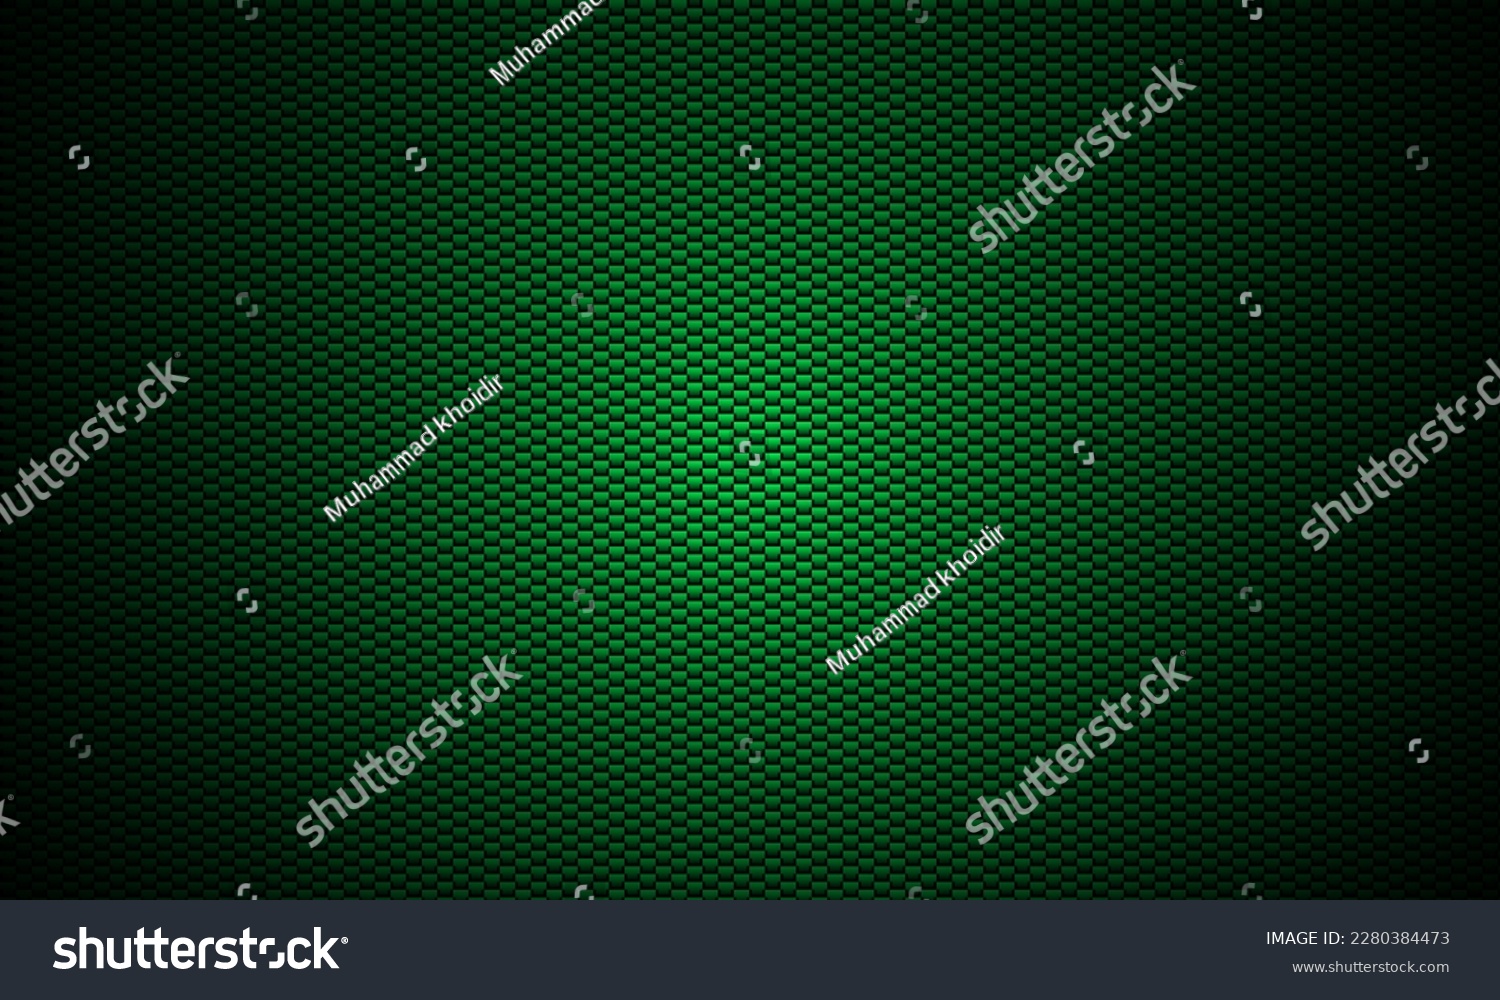 SVG of abstract green carbon fiber texture background svg